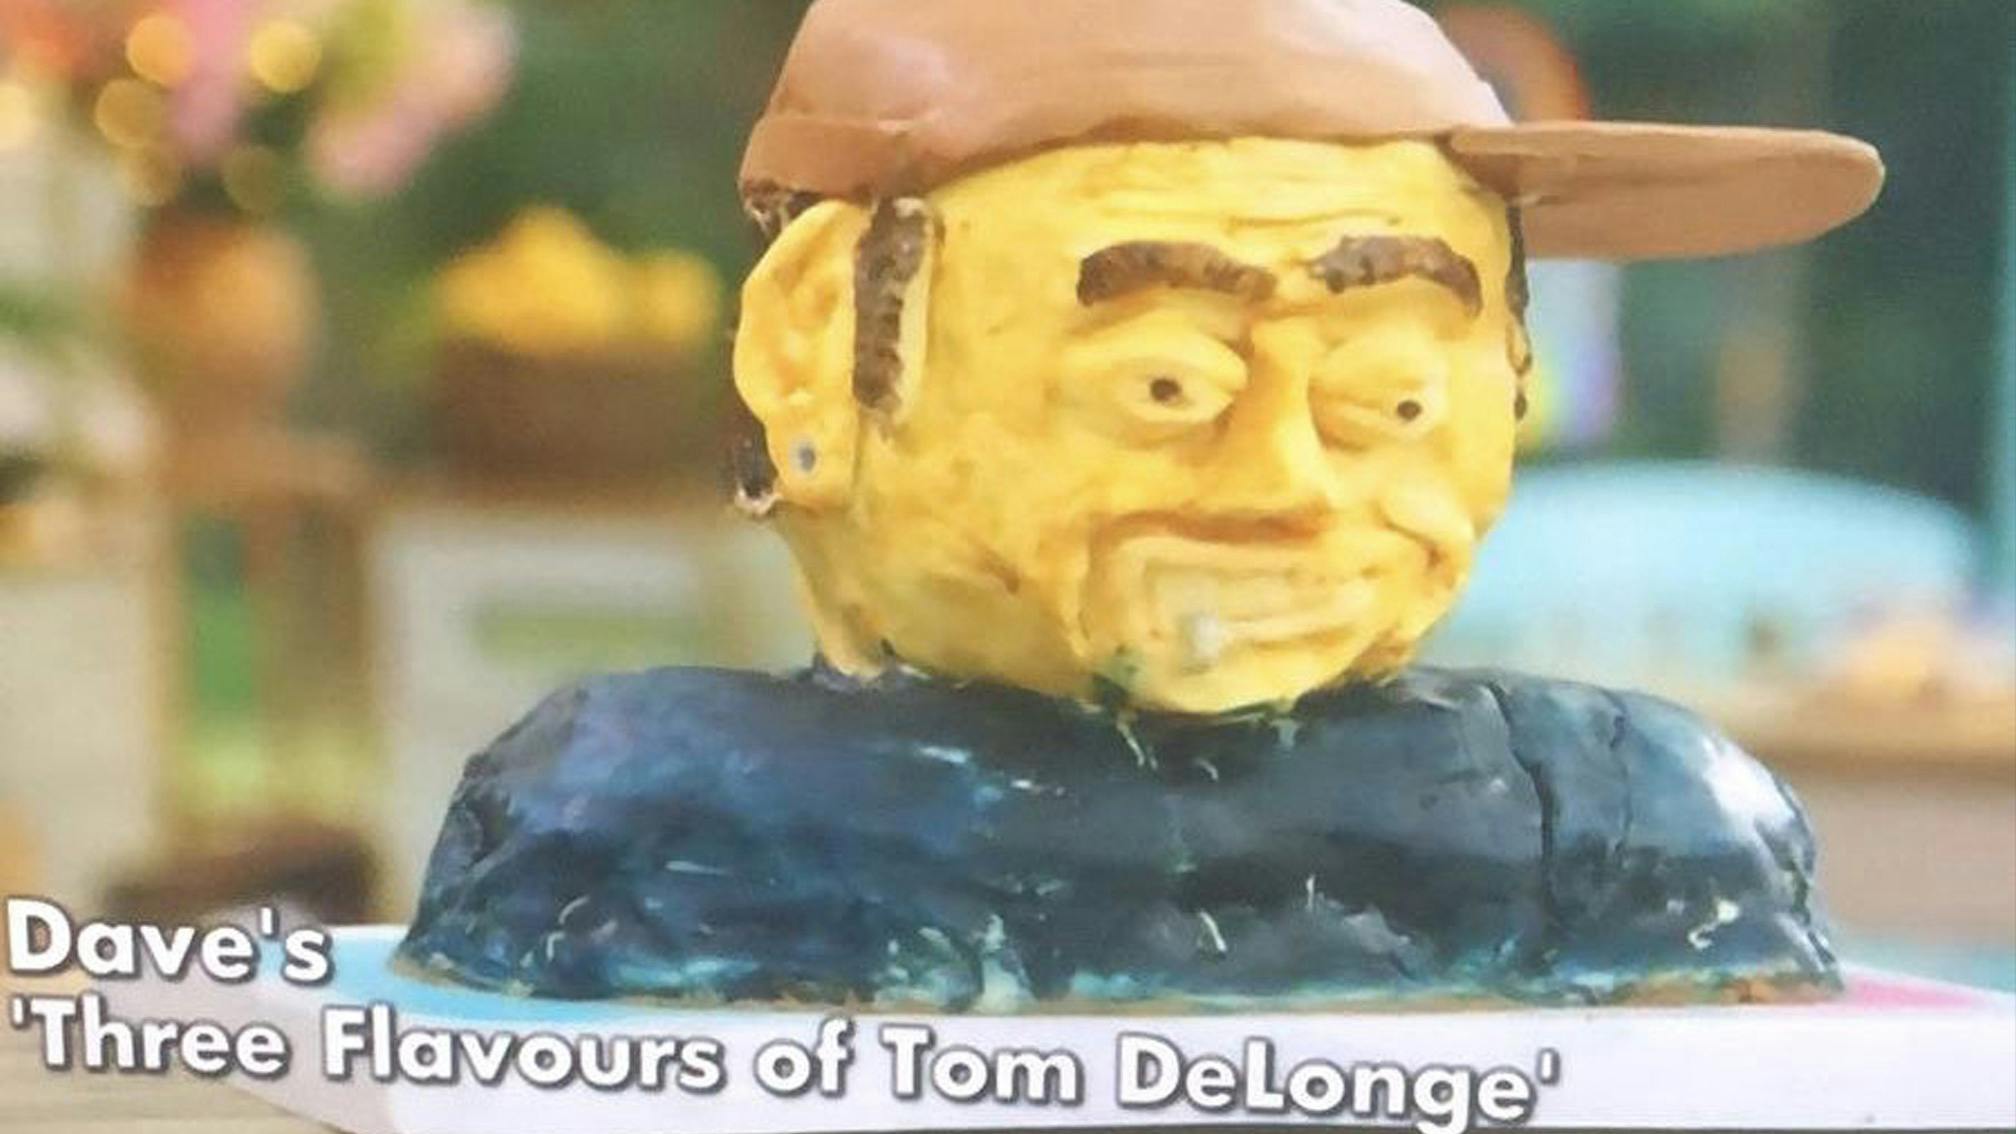 Contestant Makes Tom DeLonge Cake In First Episode Of The Great British Bake Off